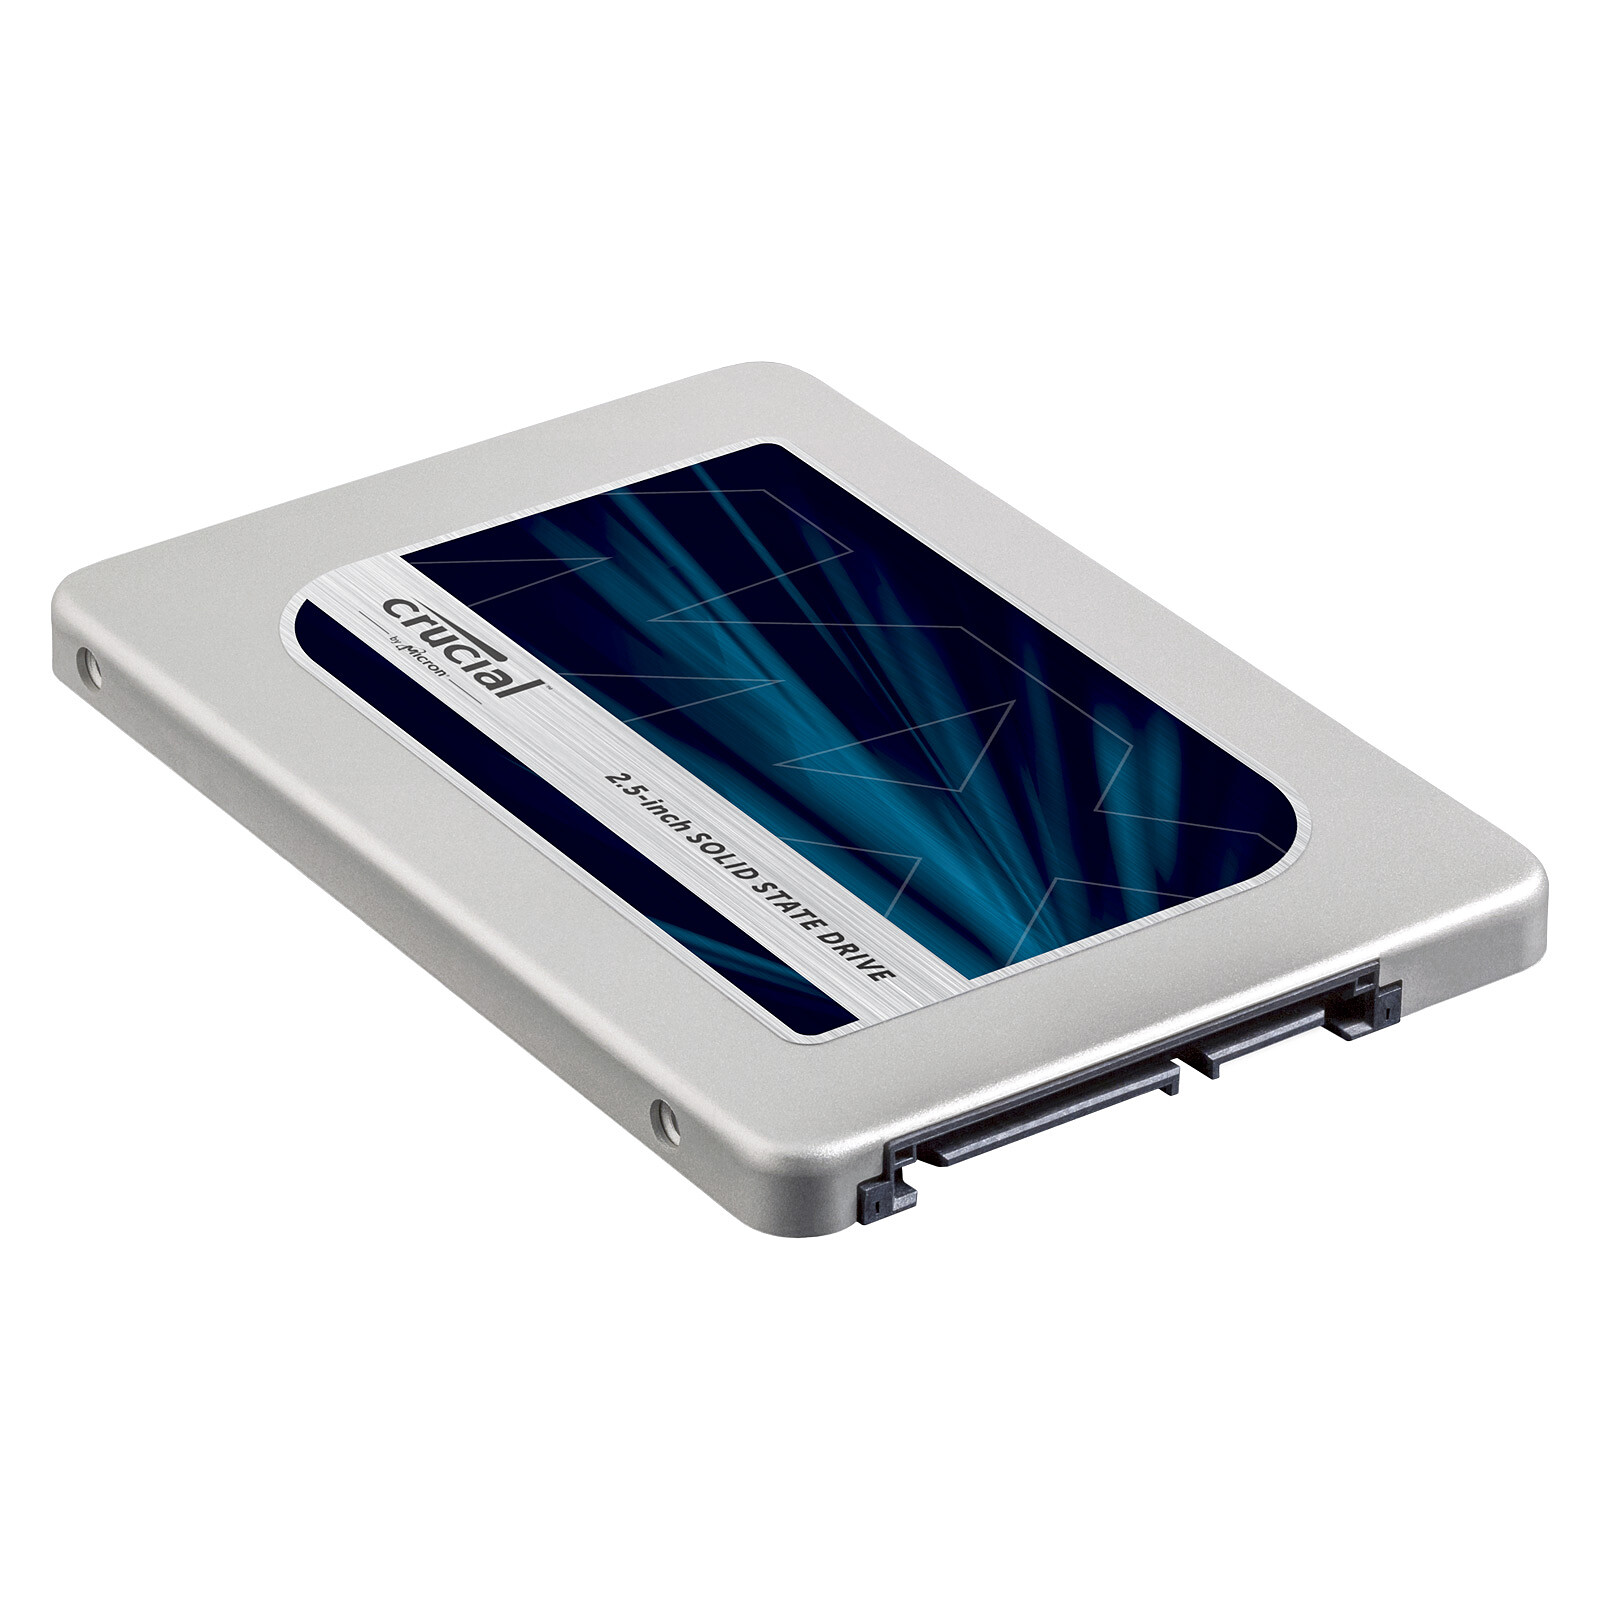 Crucial Disque Ssd Interne Mx500 250 Go 500 Go À 1 To 2 To 4 To Bx500 480g  3d Nand Sata3.0 Ssd Hdd Disque Dur Pour Ordinateur Portable - Interne Solid  State Drives - AliExpress